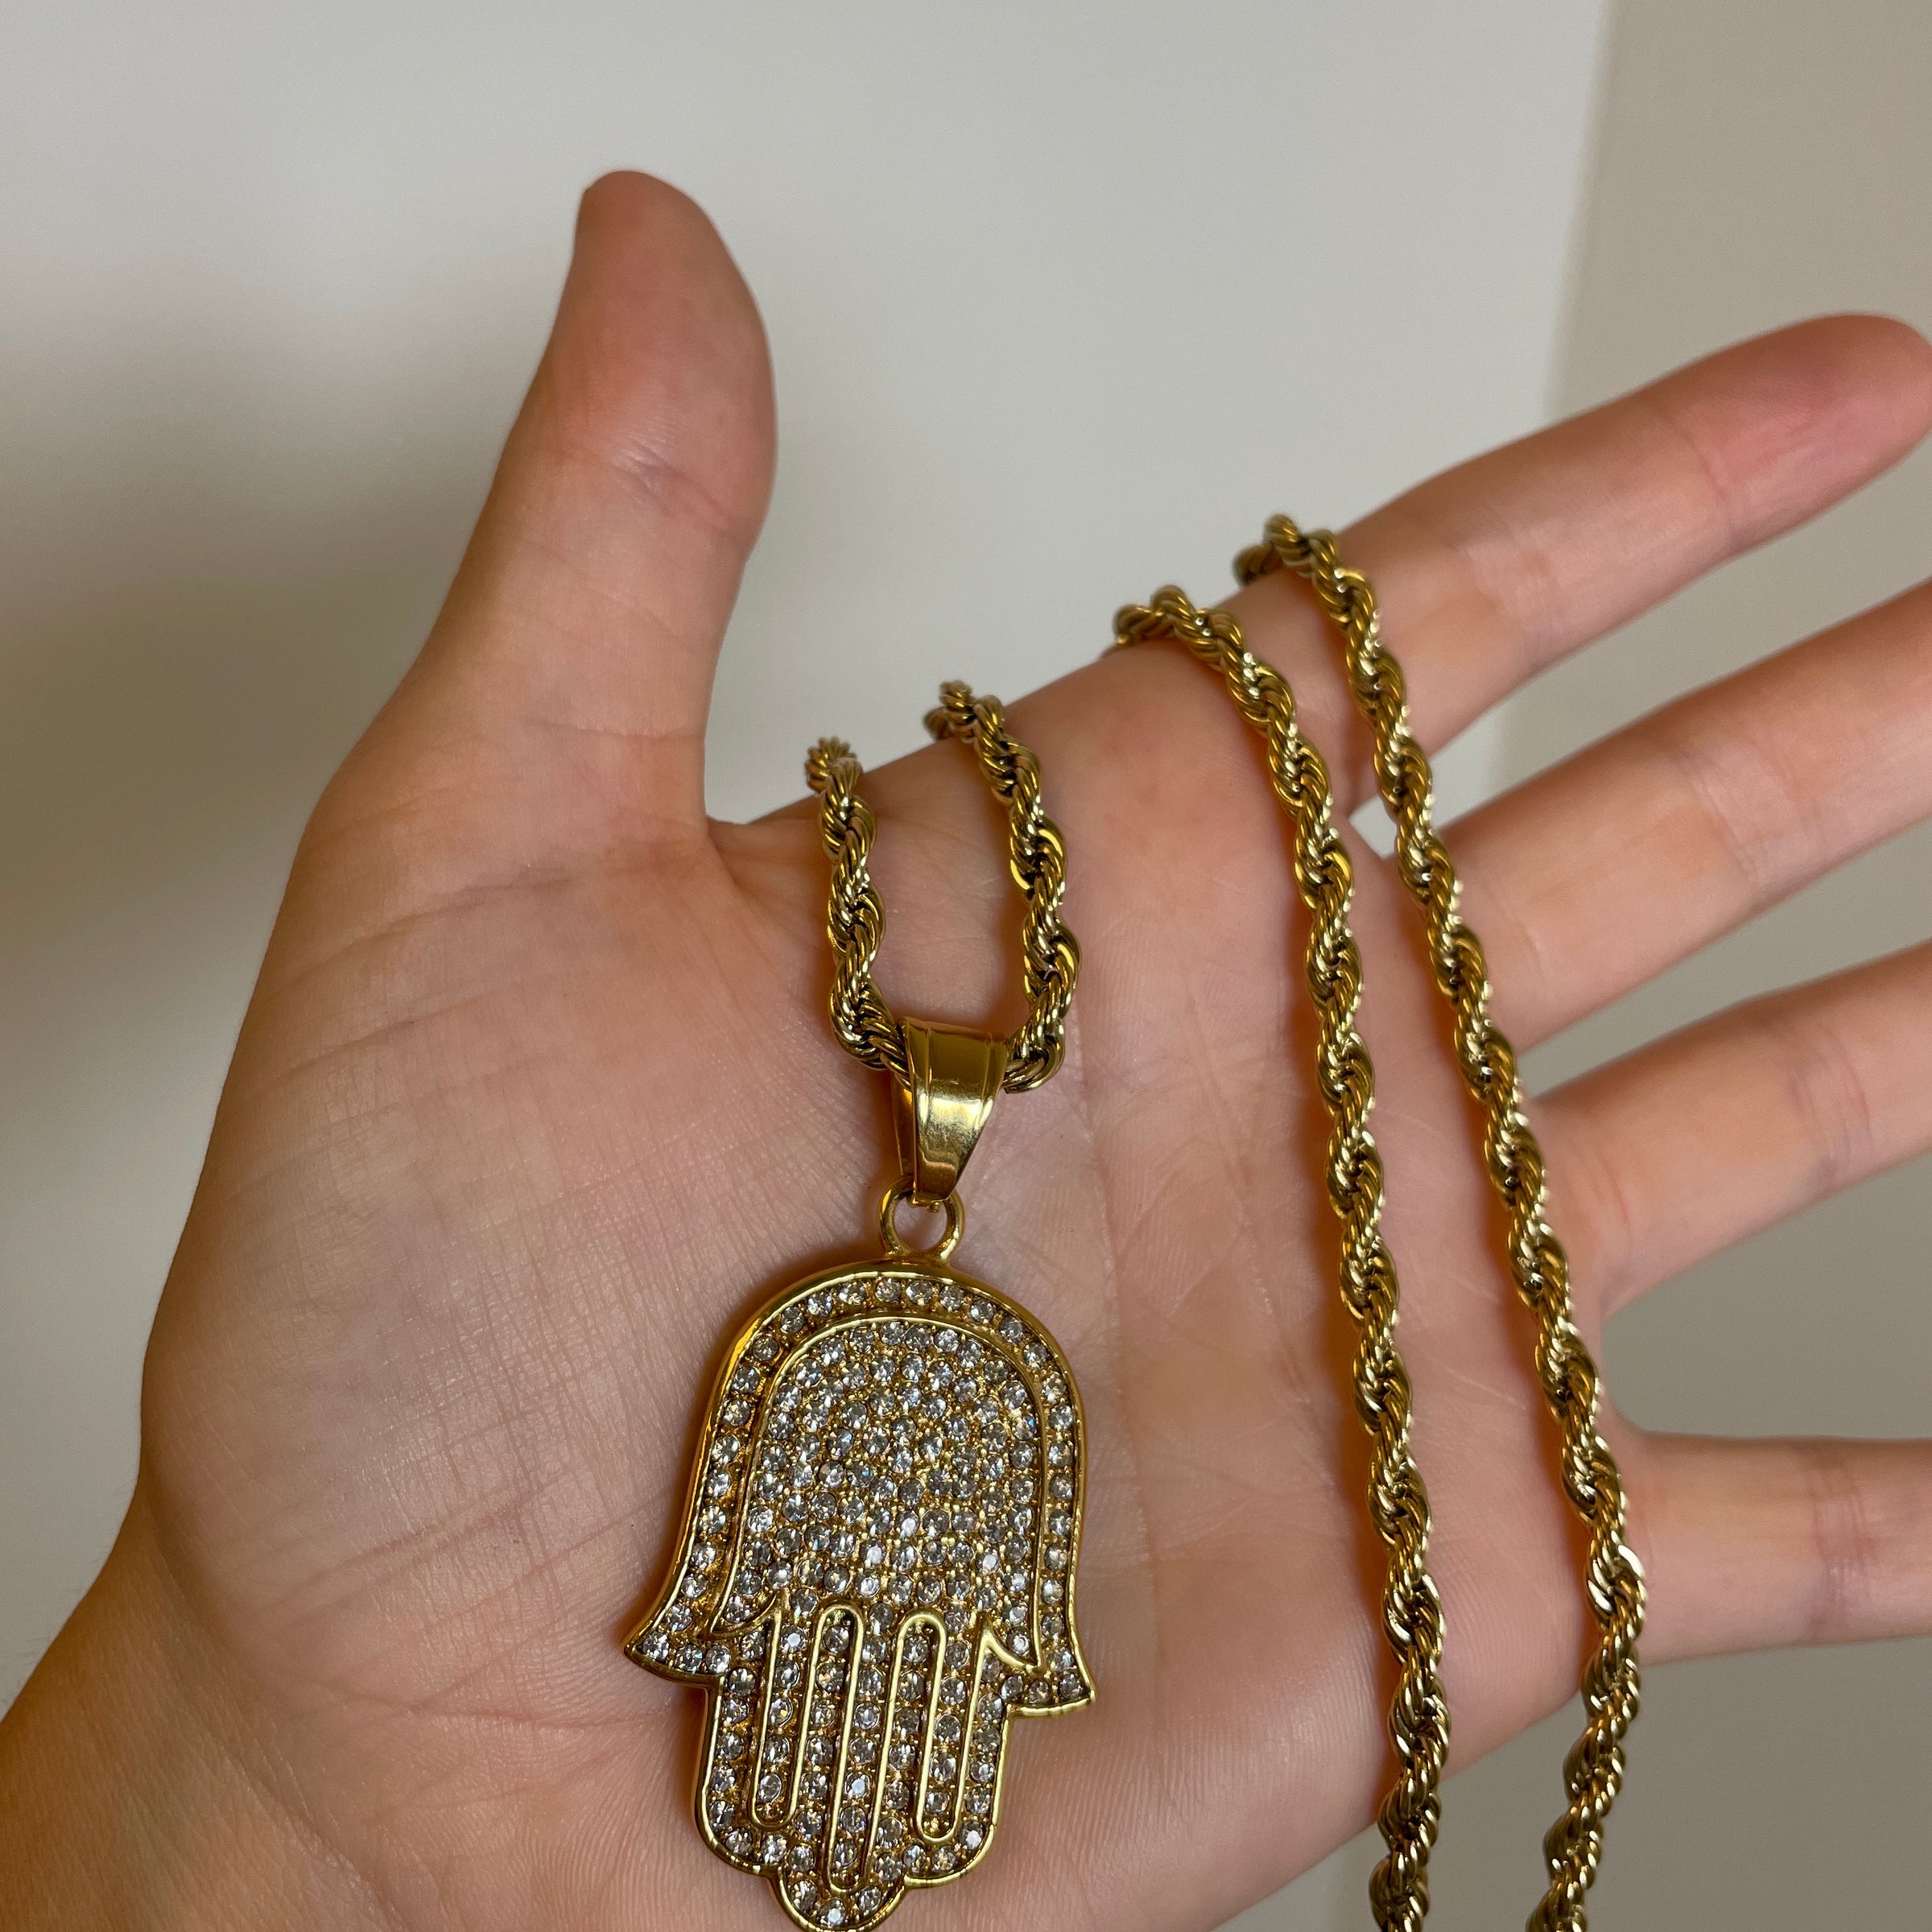 Hamsa Pendant with 14K Gold Filled Rope Necklace 4mm 24" Chain Set for Men or Women